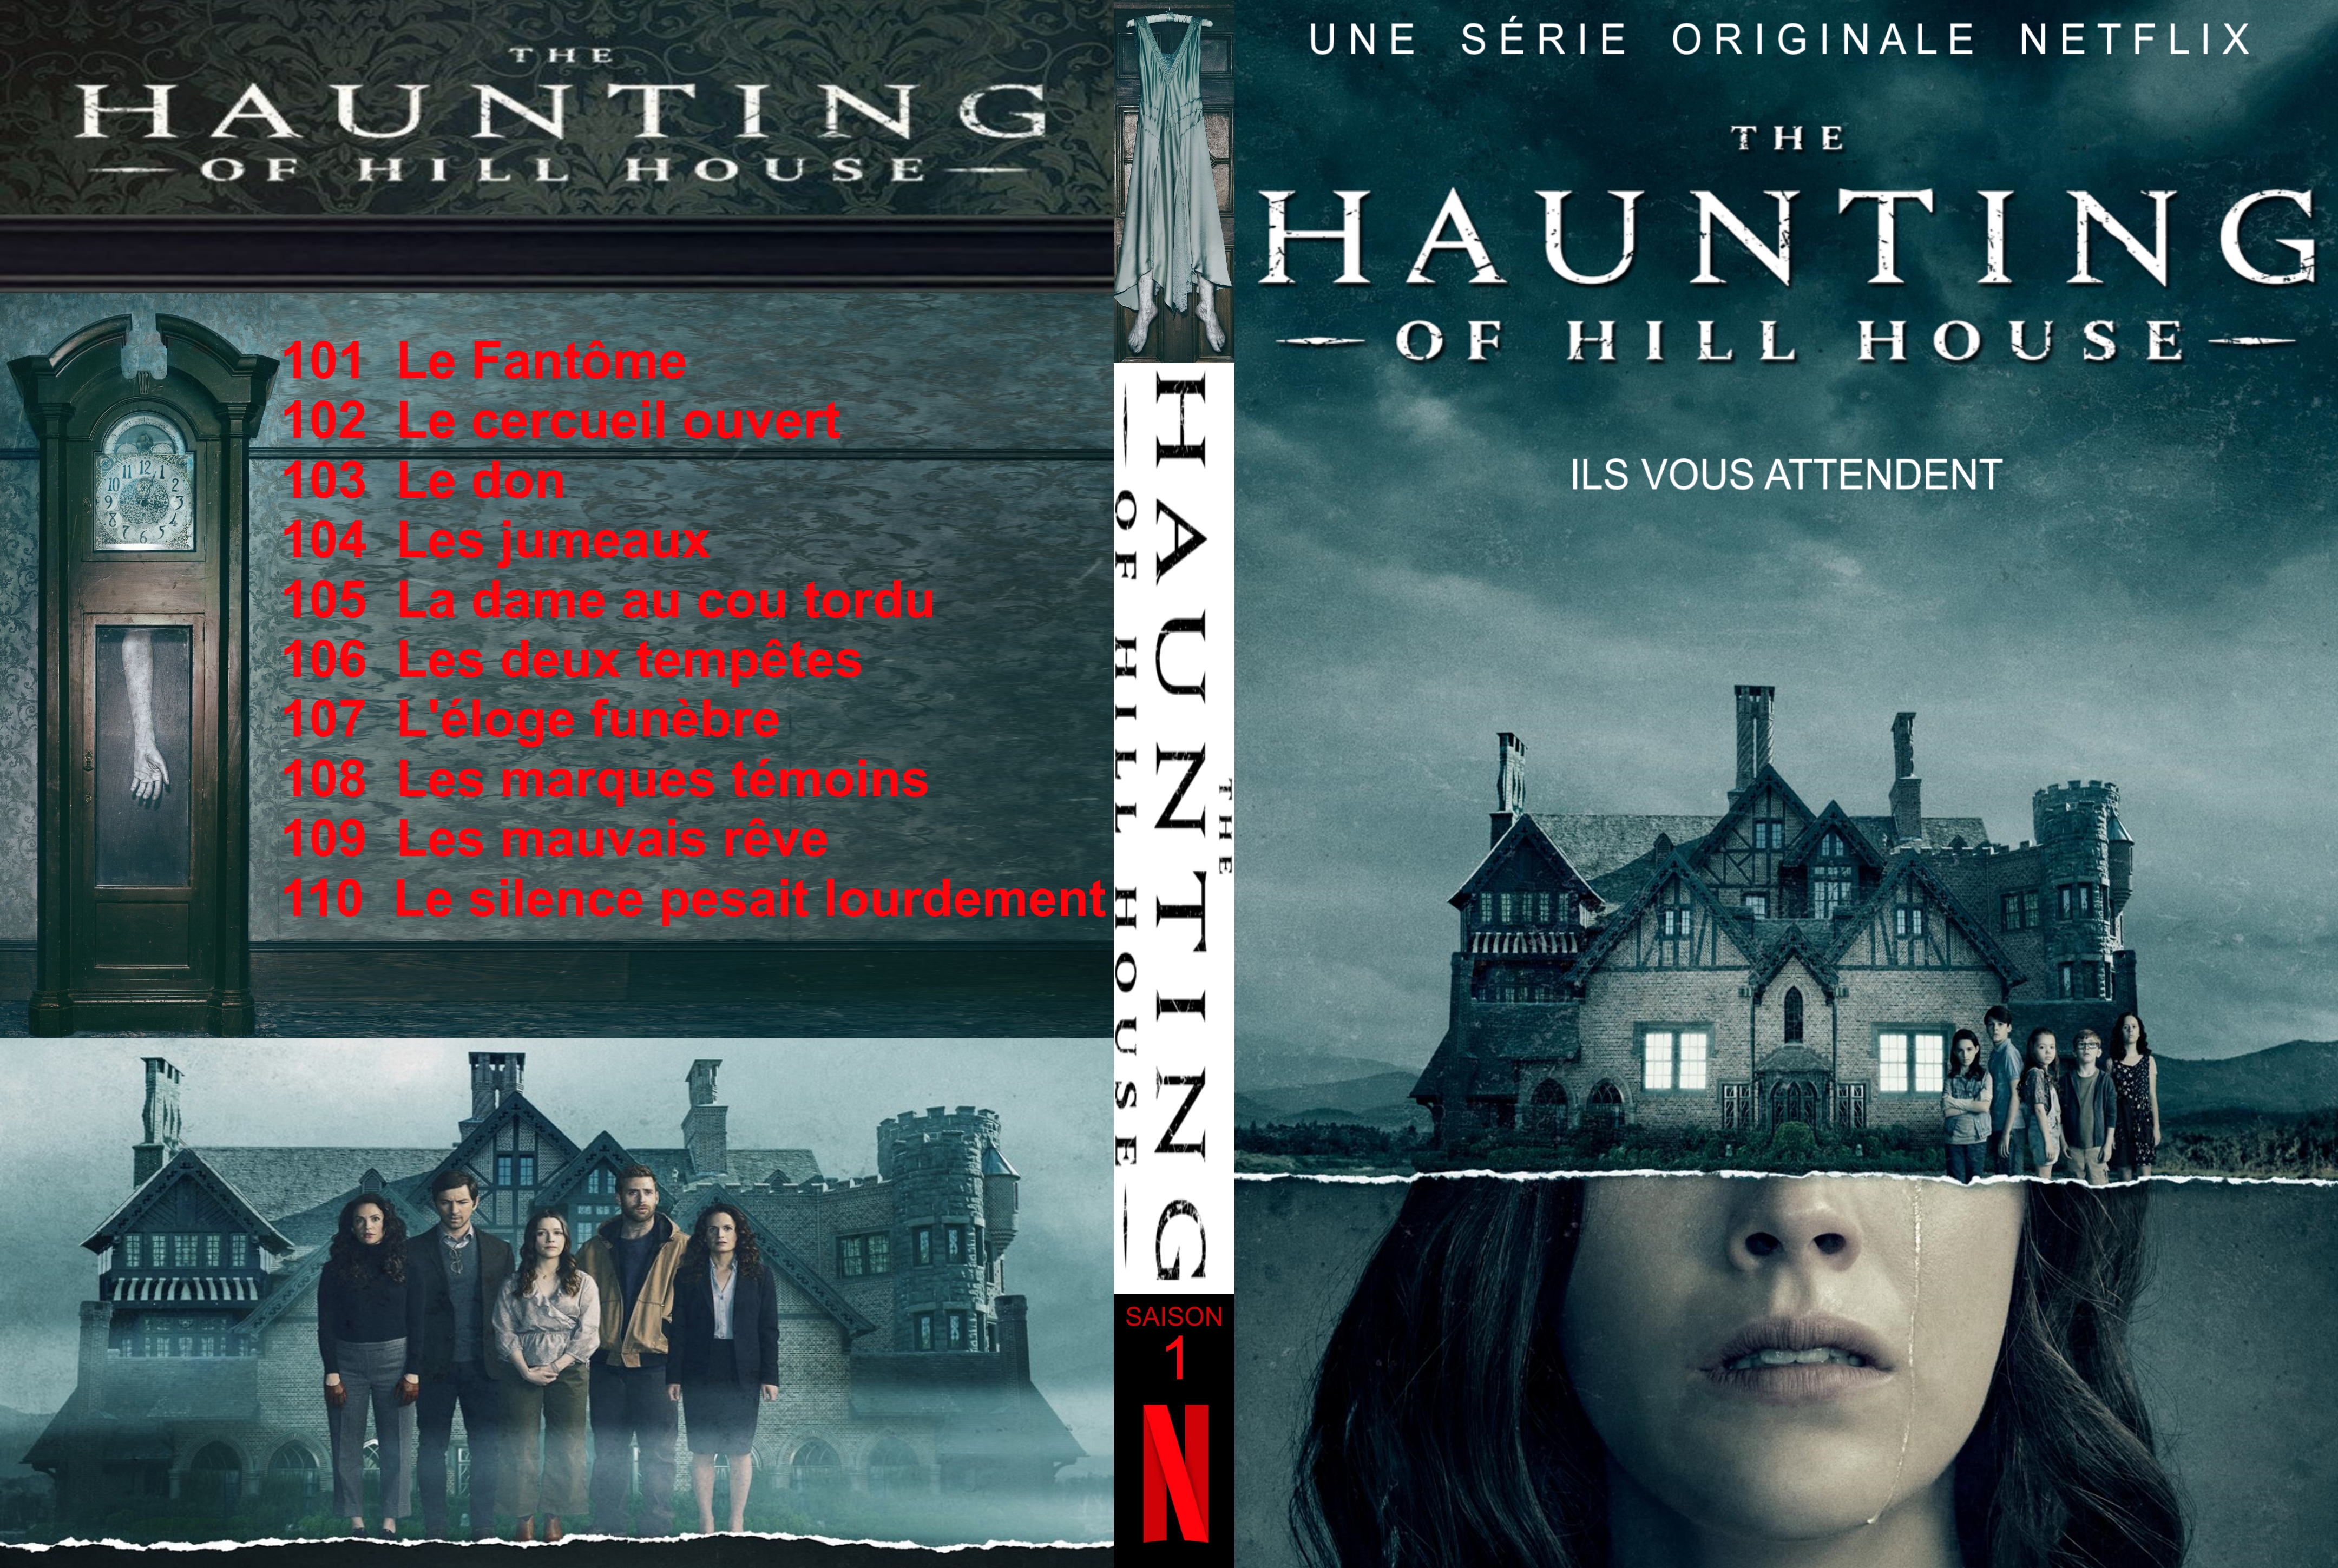 Jaquette DVD The Haunting of Hill House Saison 1 custom